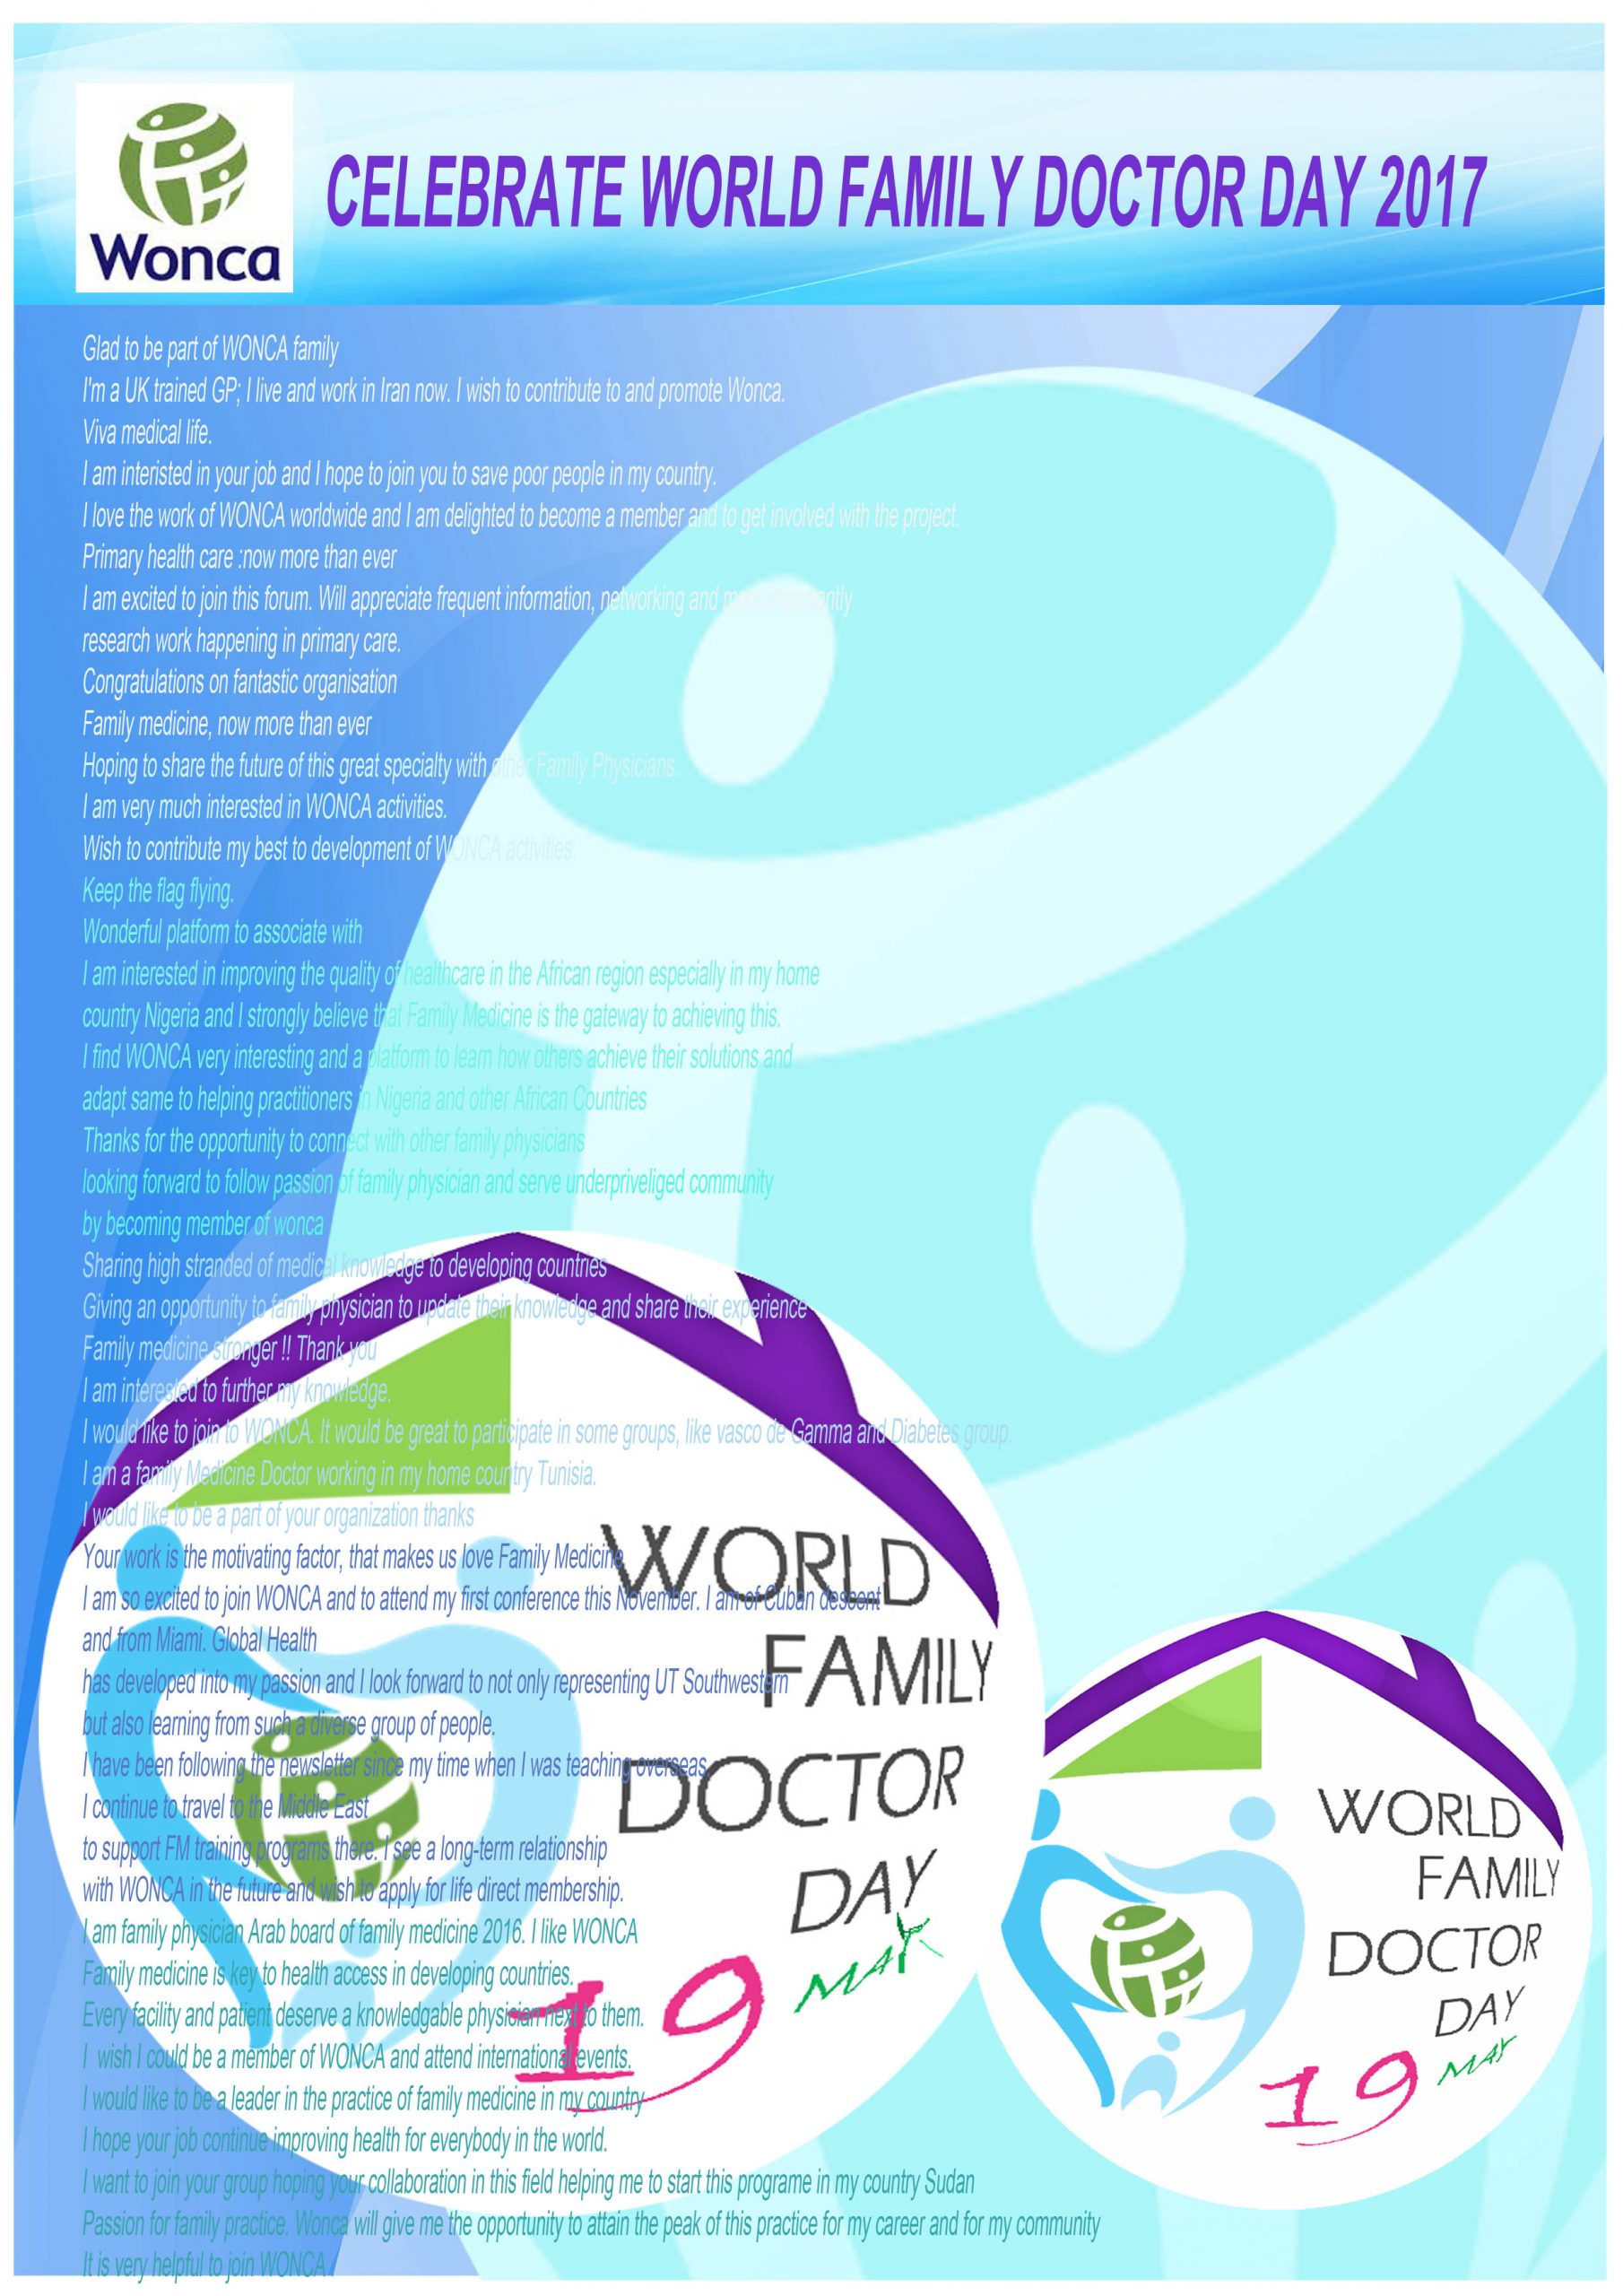 wonca celebrate world family doctor day 2017